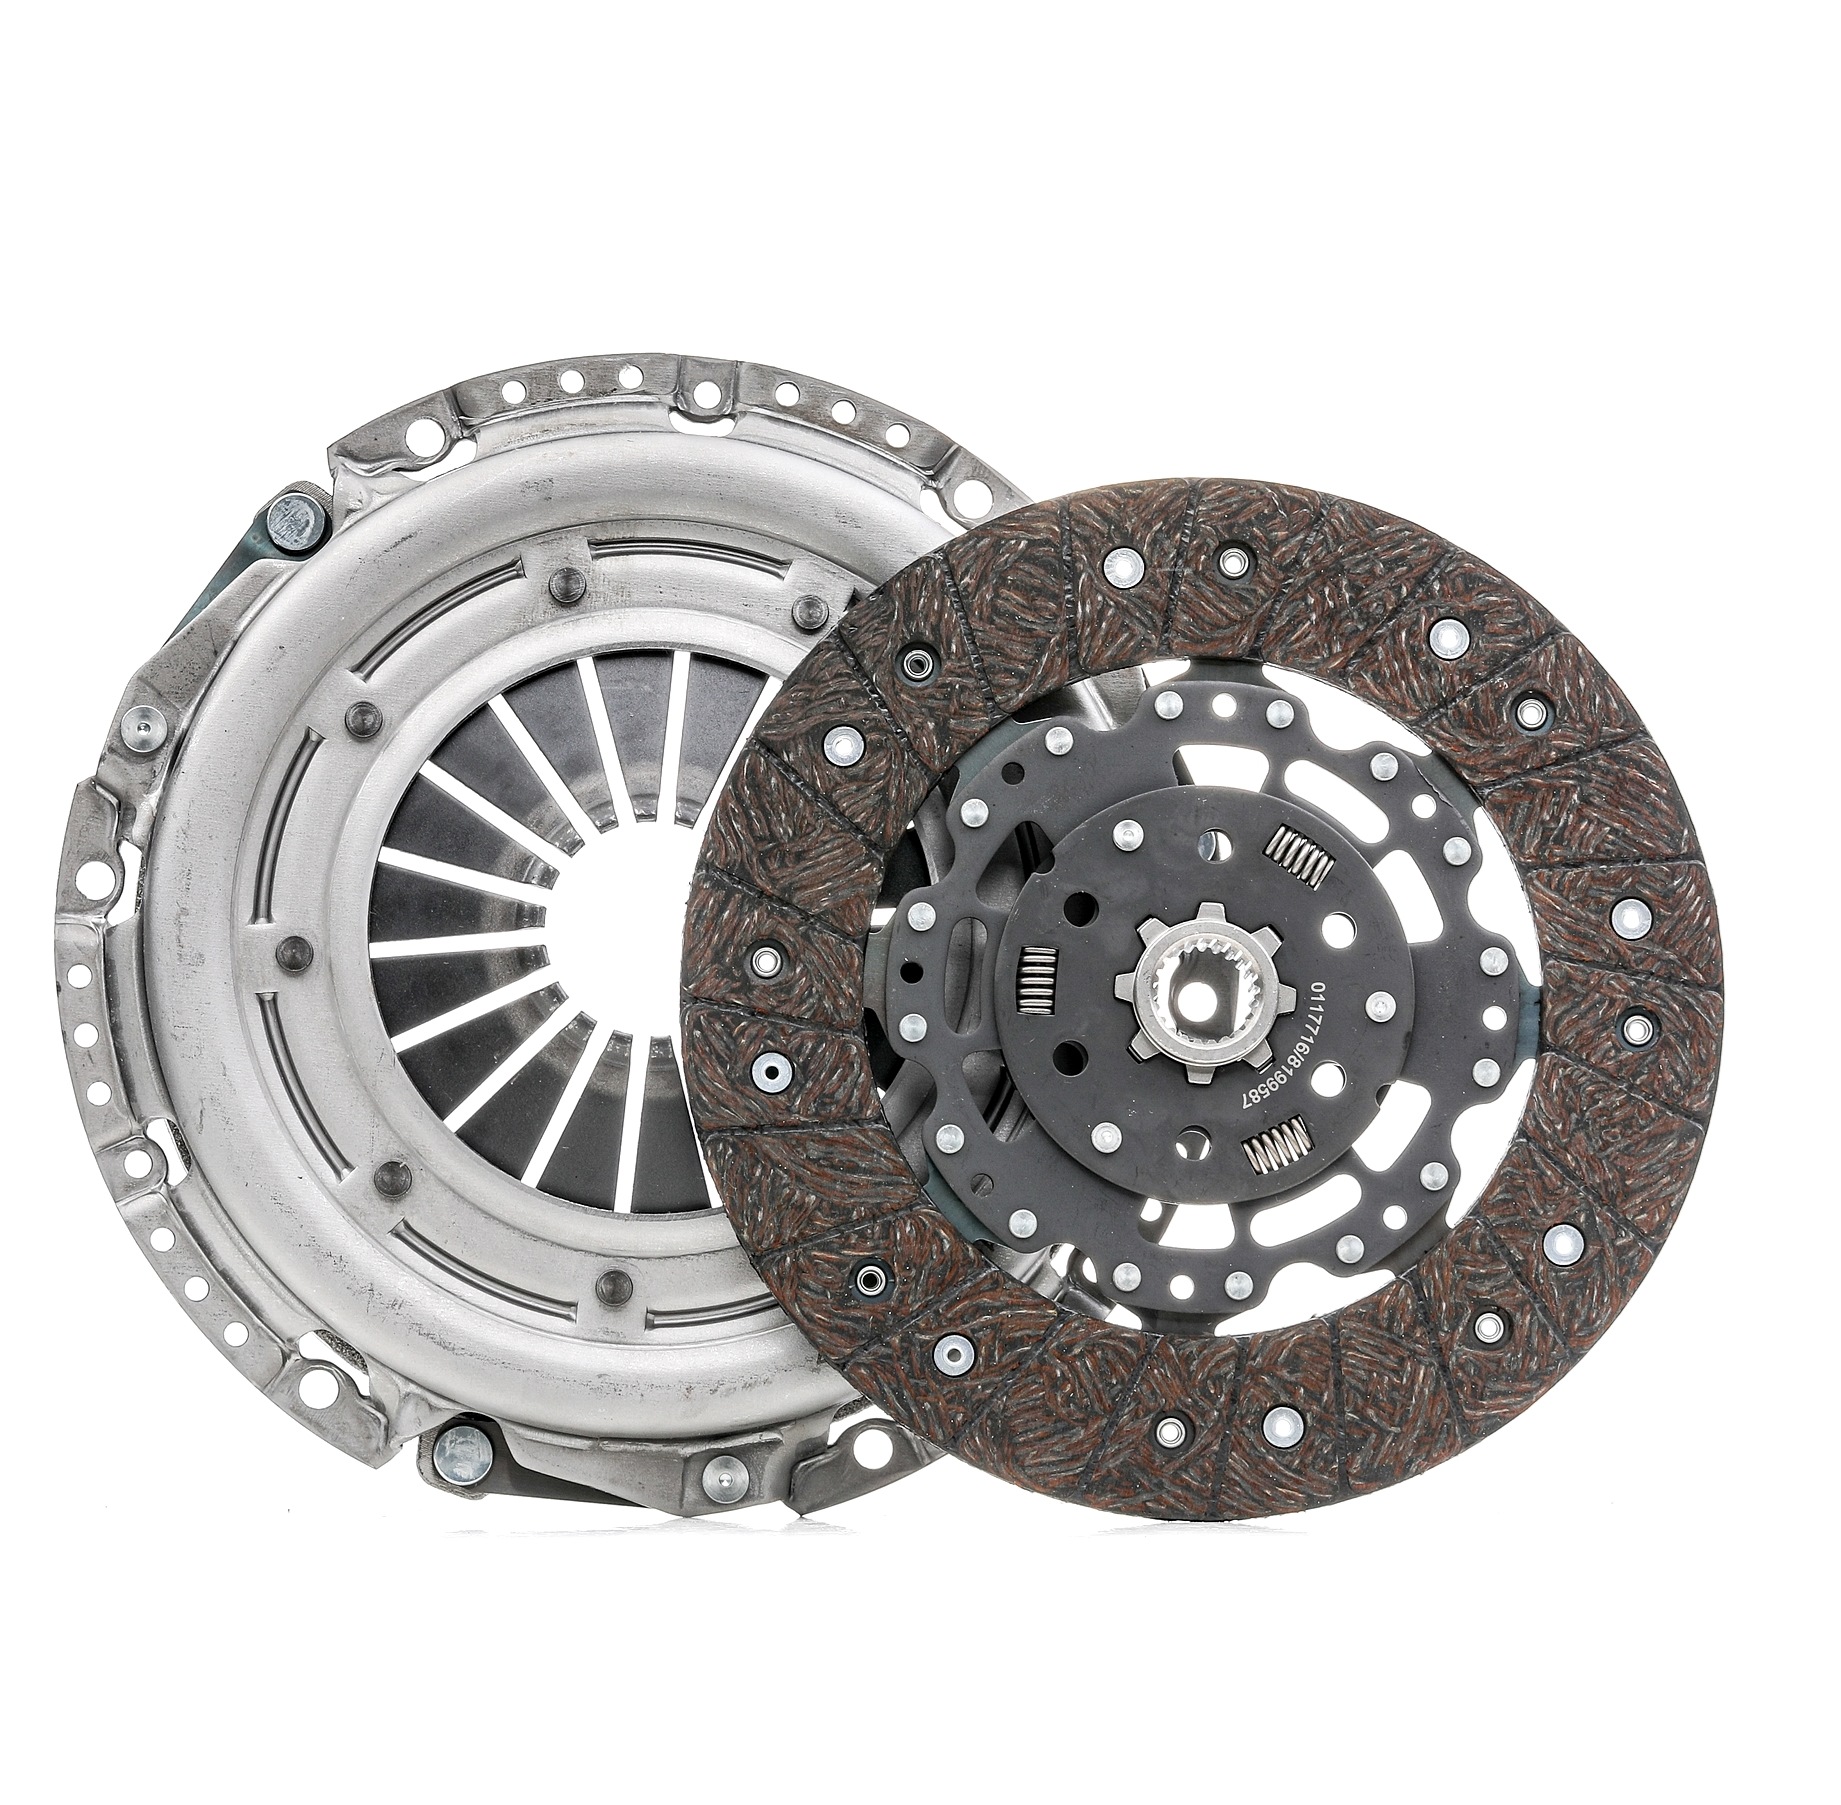 STARK SKCK-0100197 Clutch kit for engines with dual-mass flywheel, two-piece, without clutch release bearing, Check and replace dual-mass flywheel if necessary., 240mm